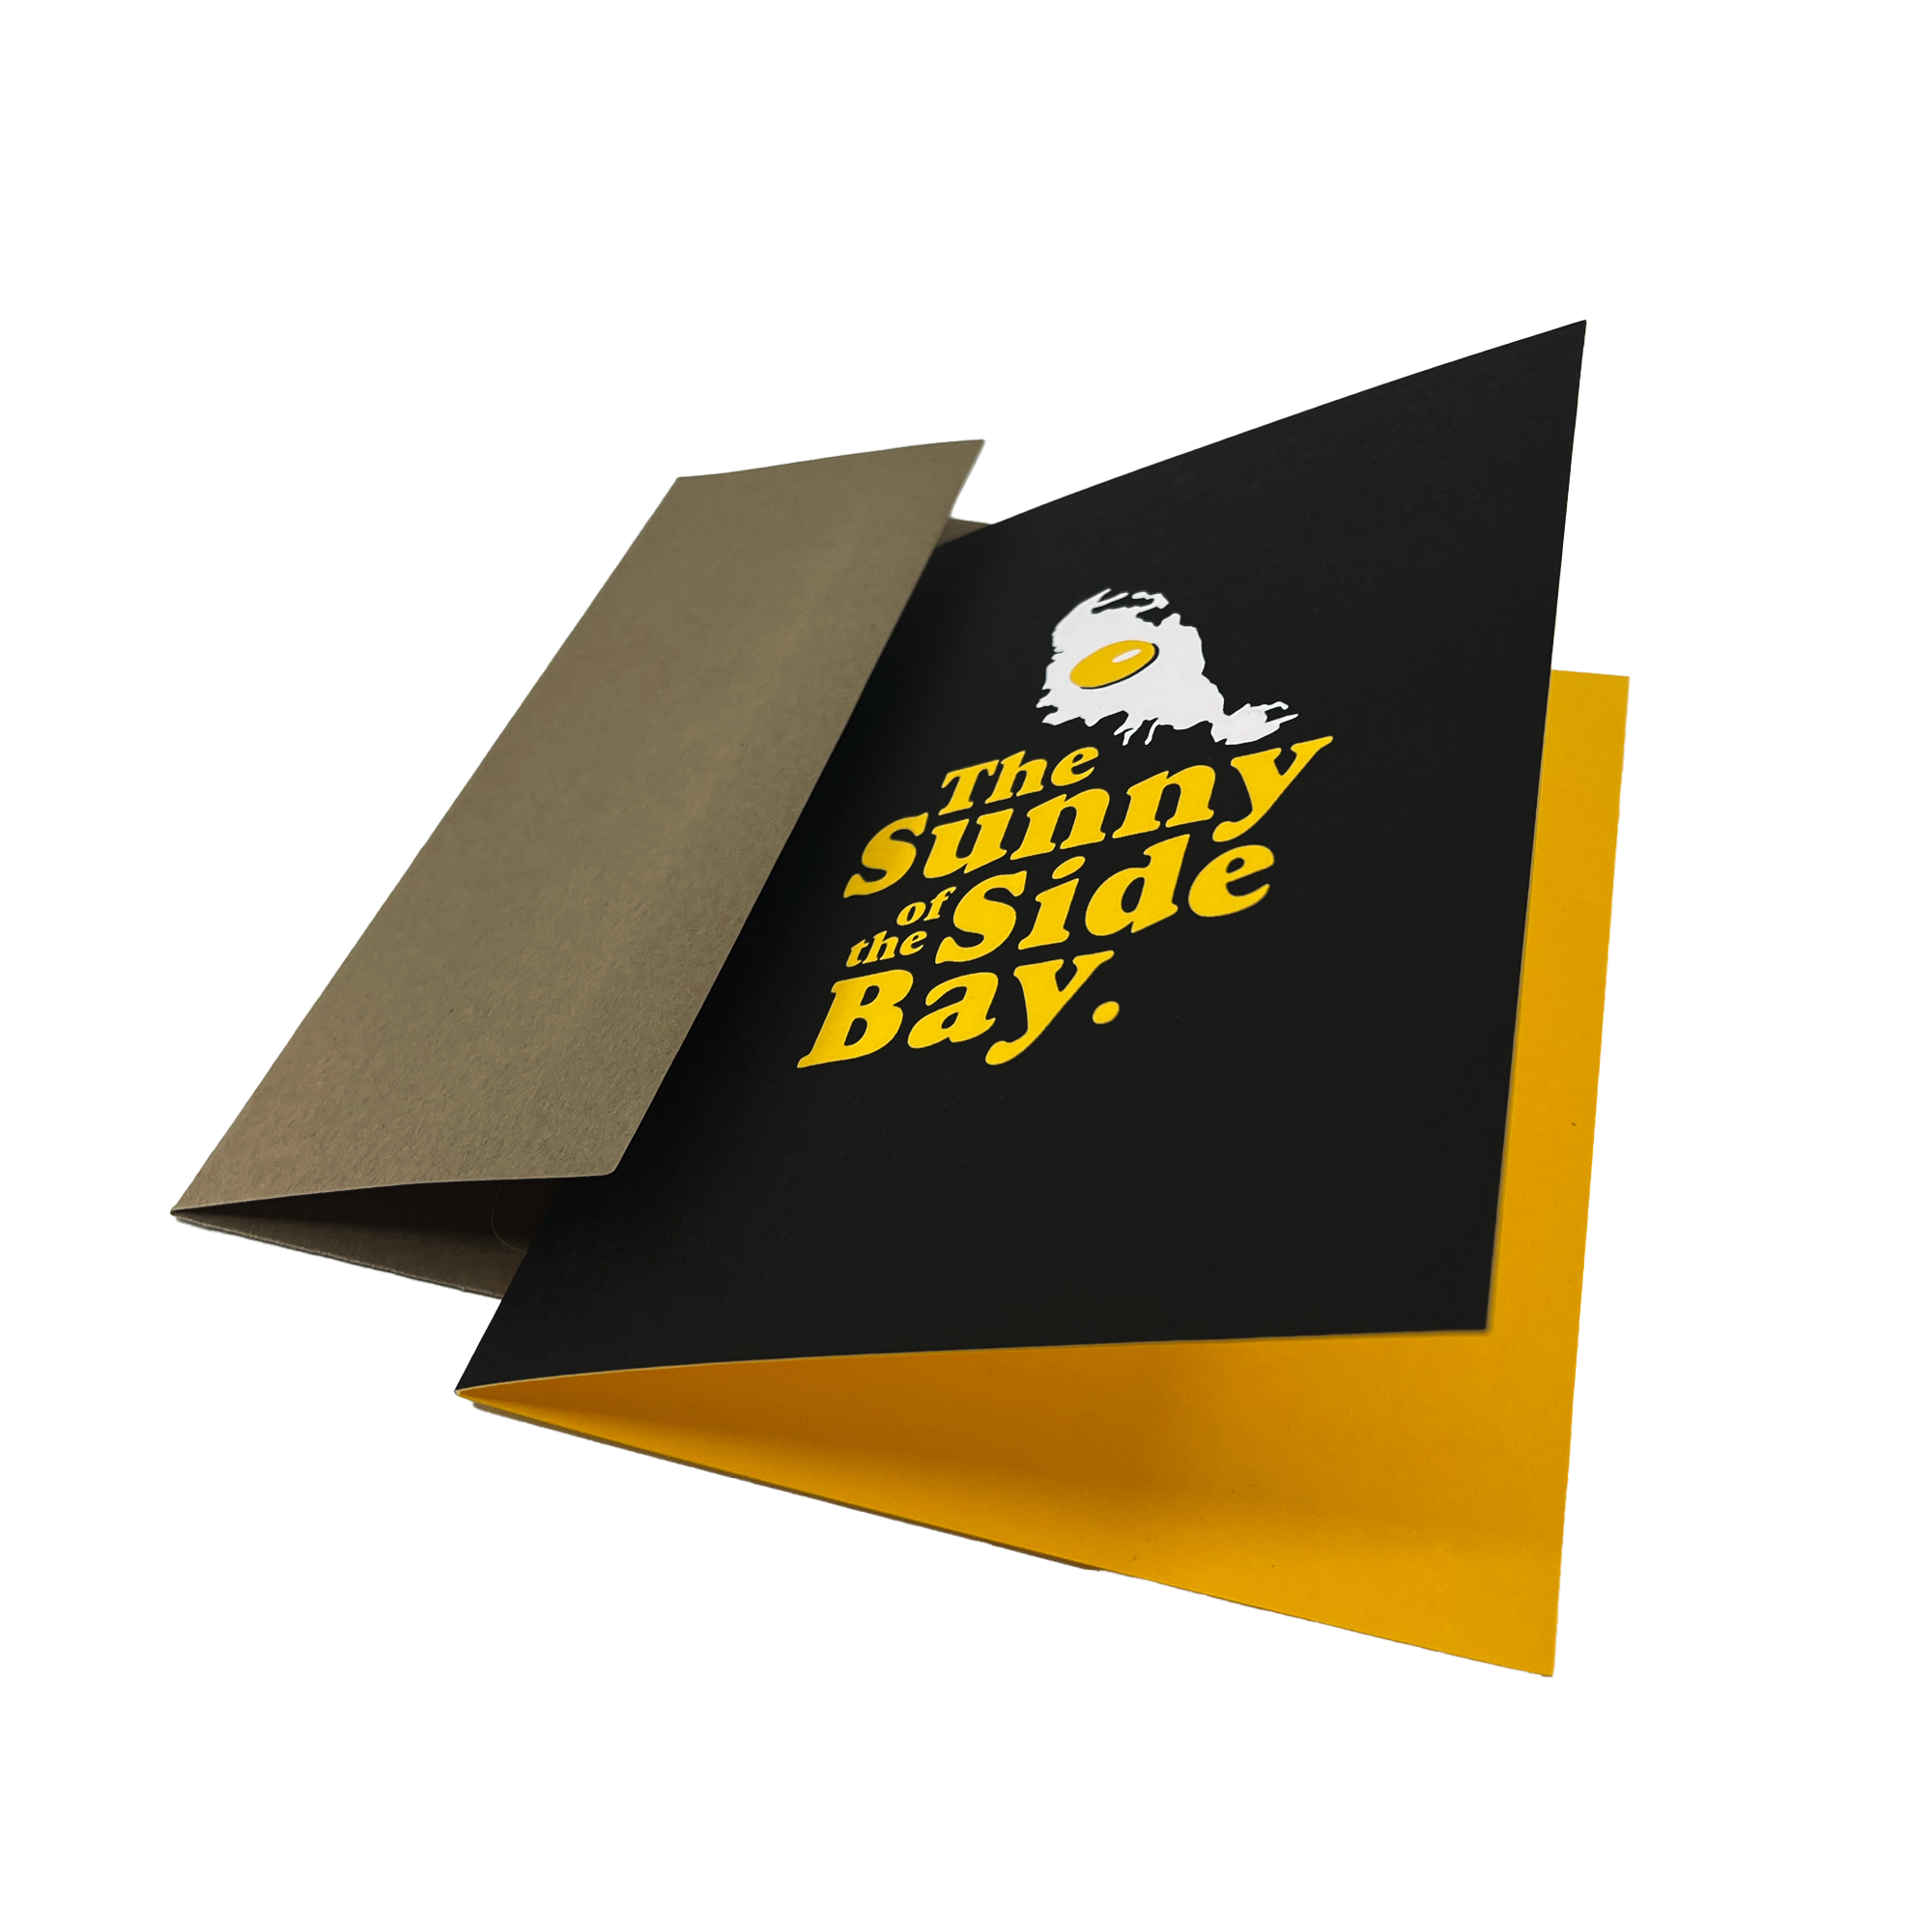 Black greeting card with The Sunnyside of the Bay wordmark and logo, open to expose the yellow inside, with a brown envelope